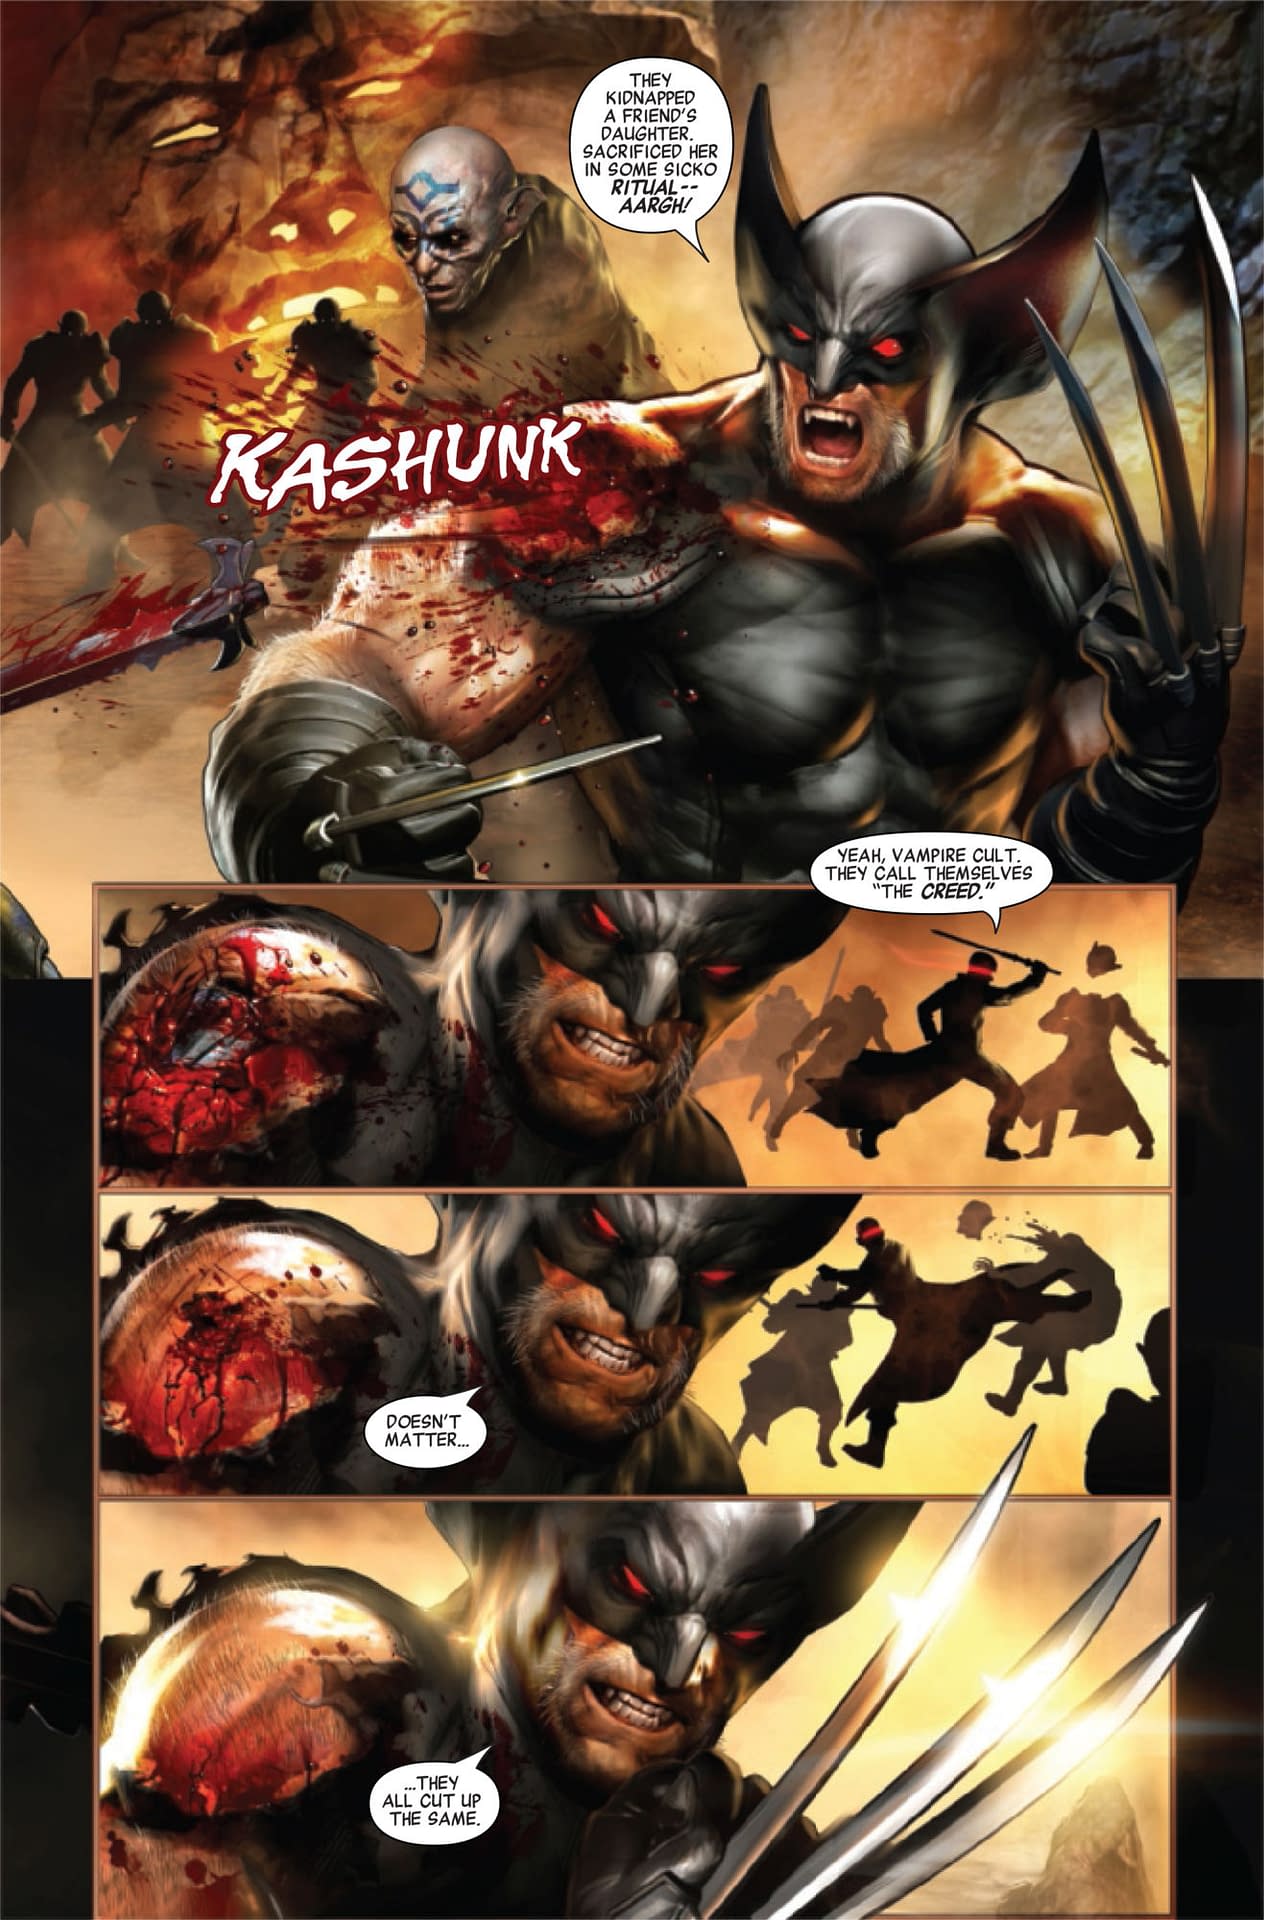 Wolverine vs. Blade #1: With Eyes Wide Open [Preview]